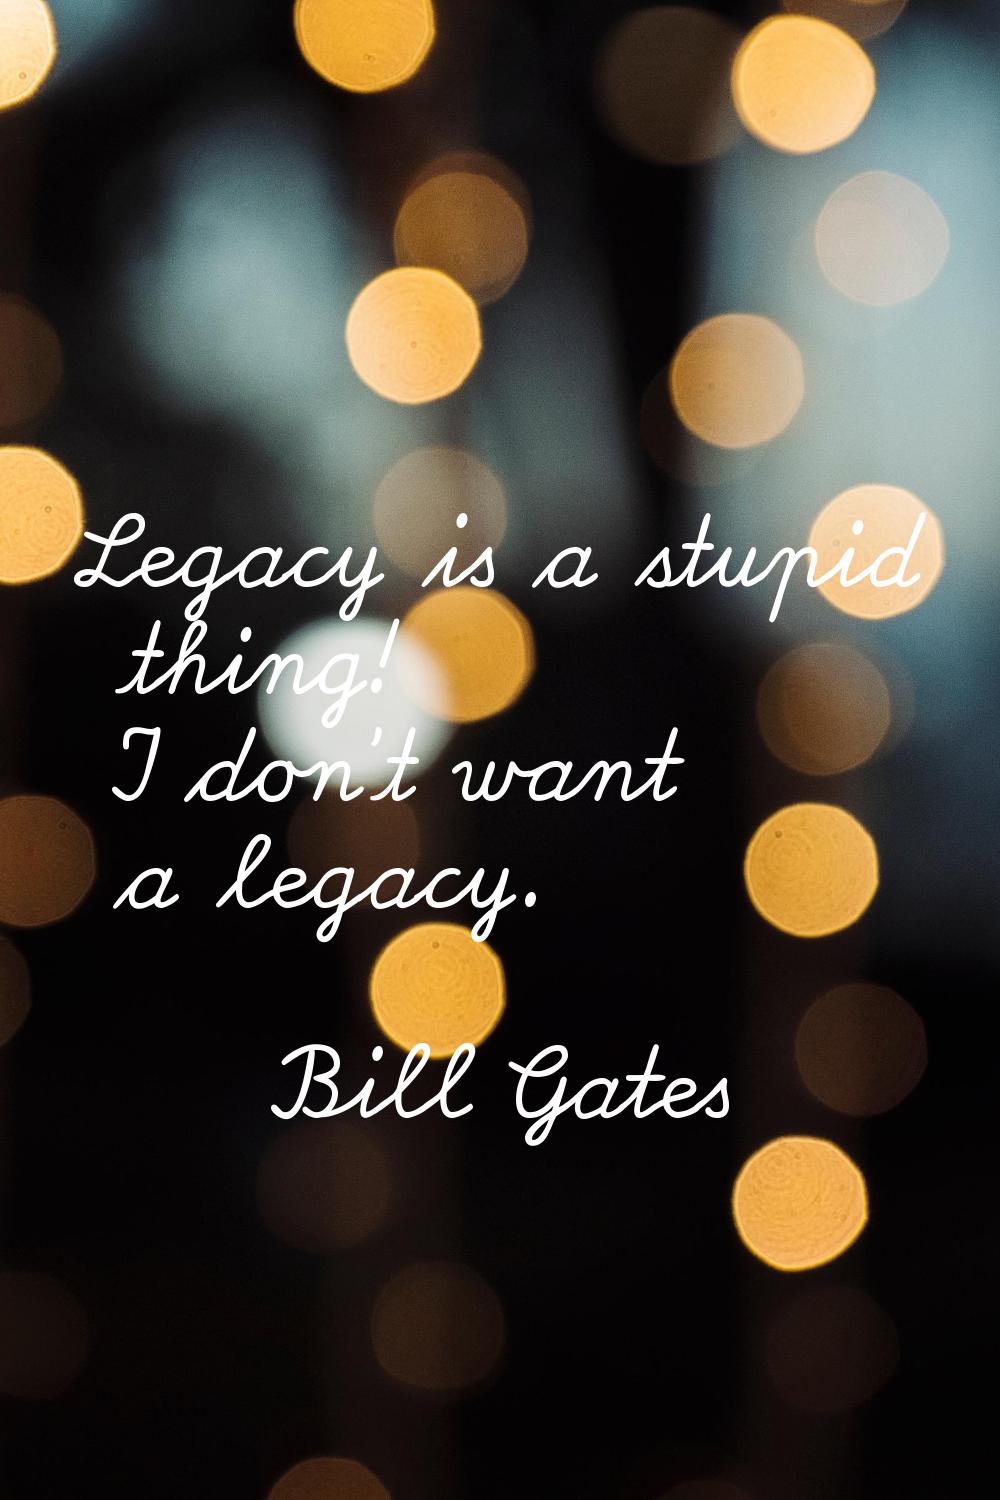 Legacy is a stupid thing! I don't want a legacy.